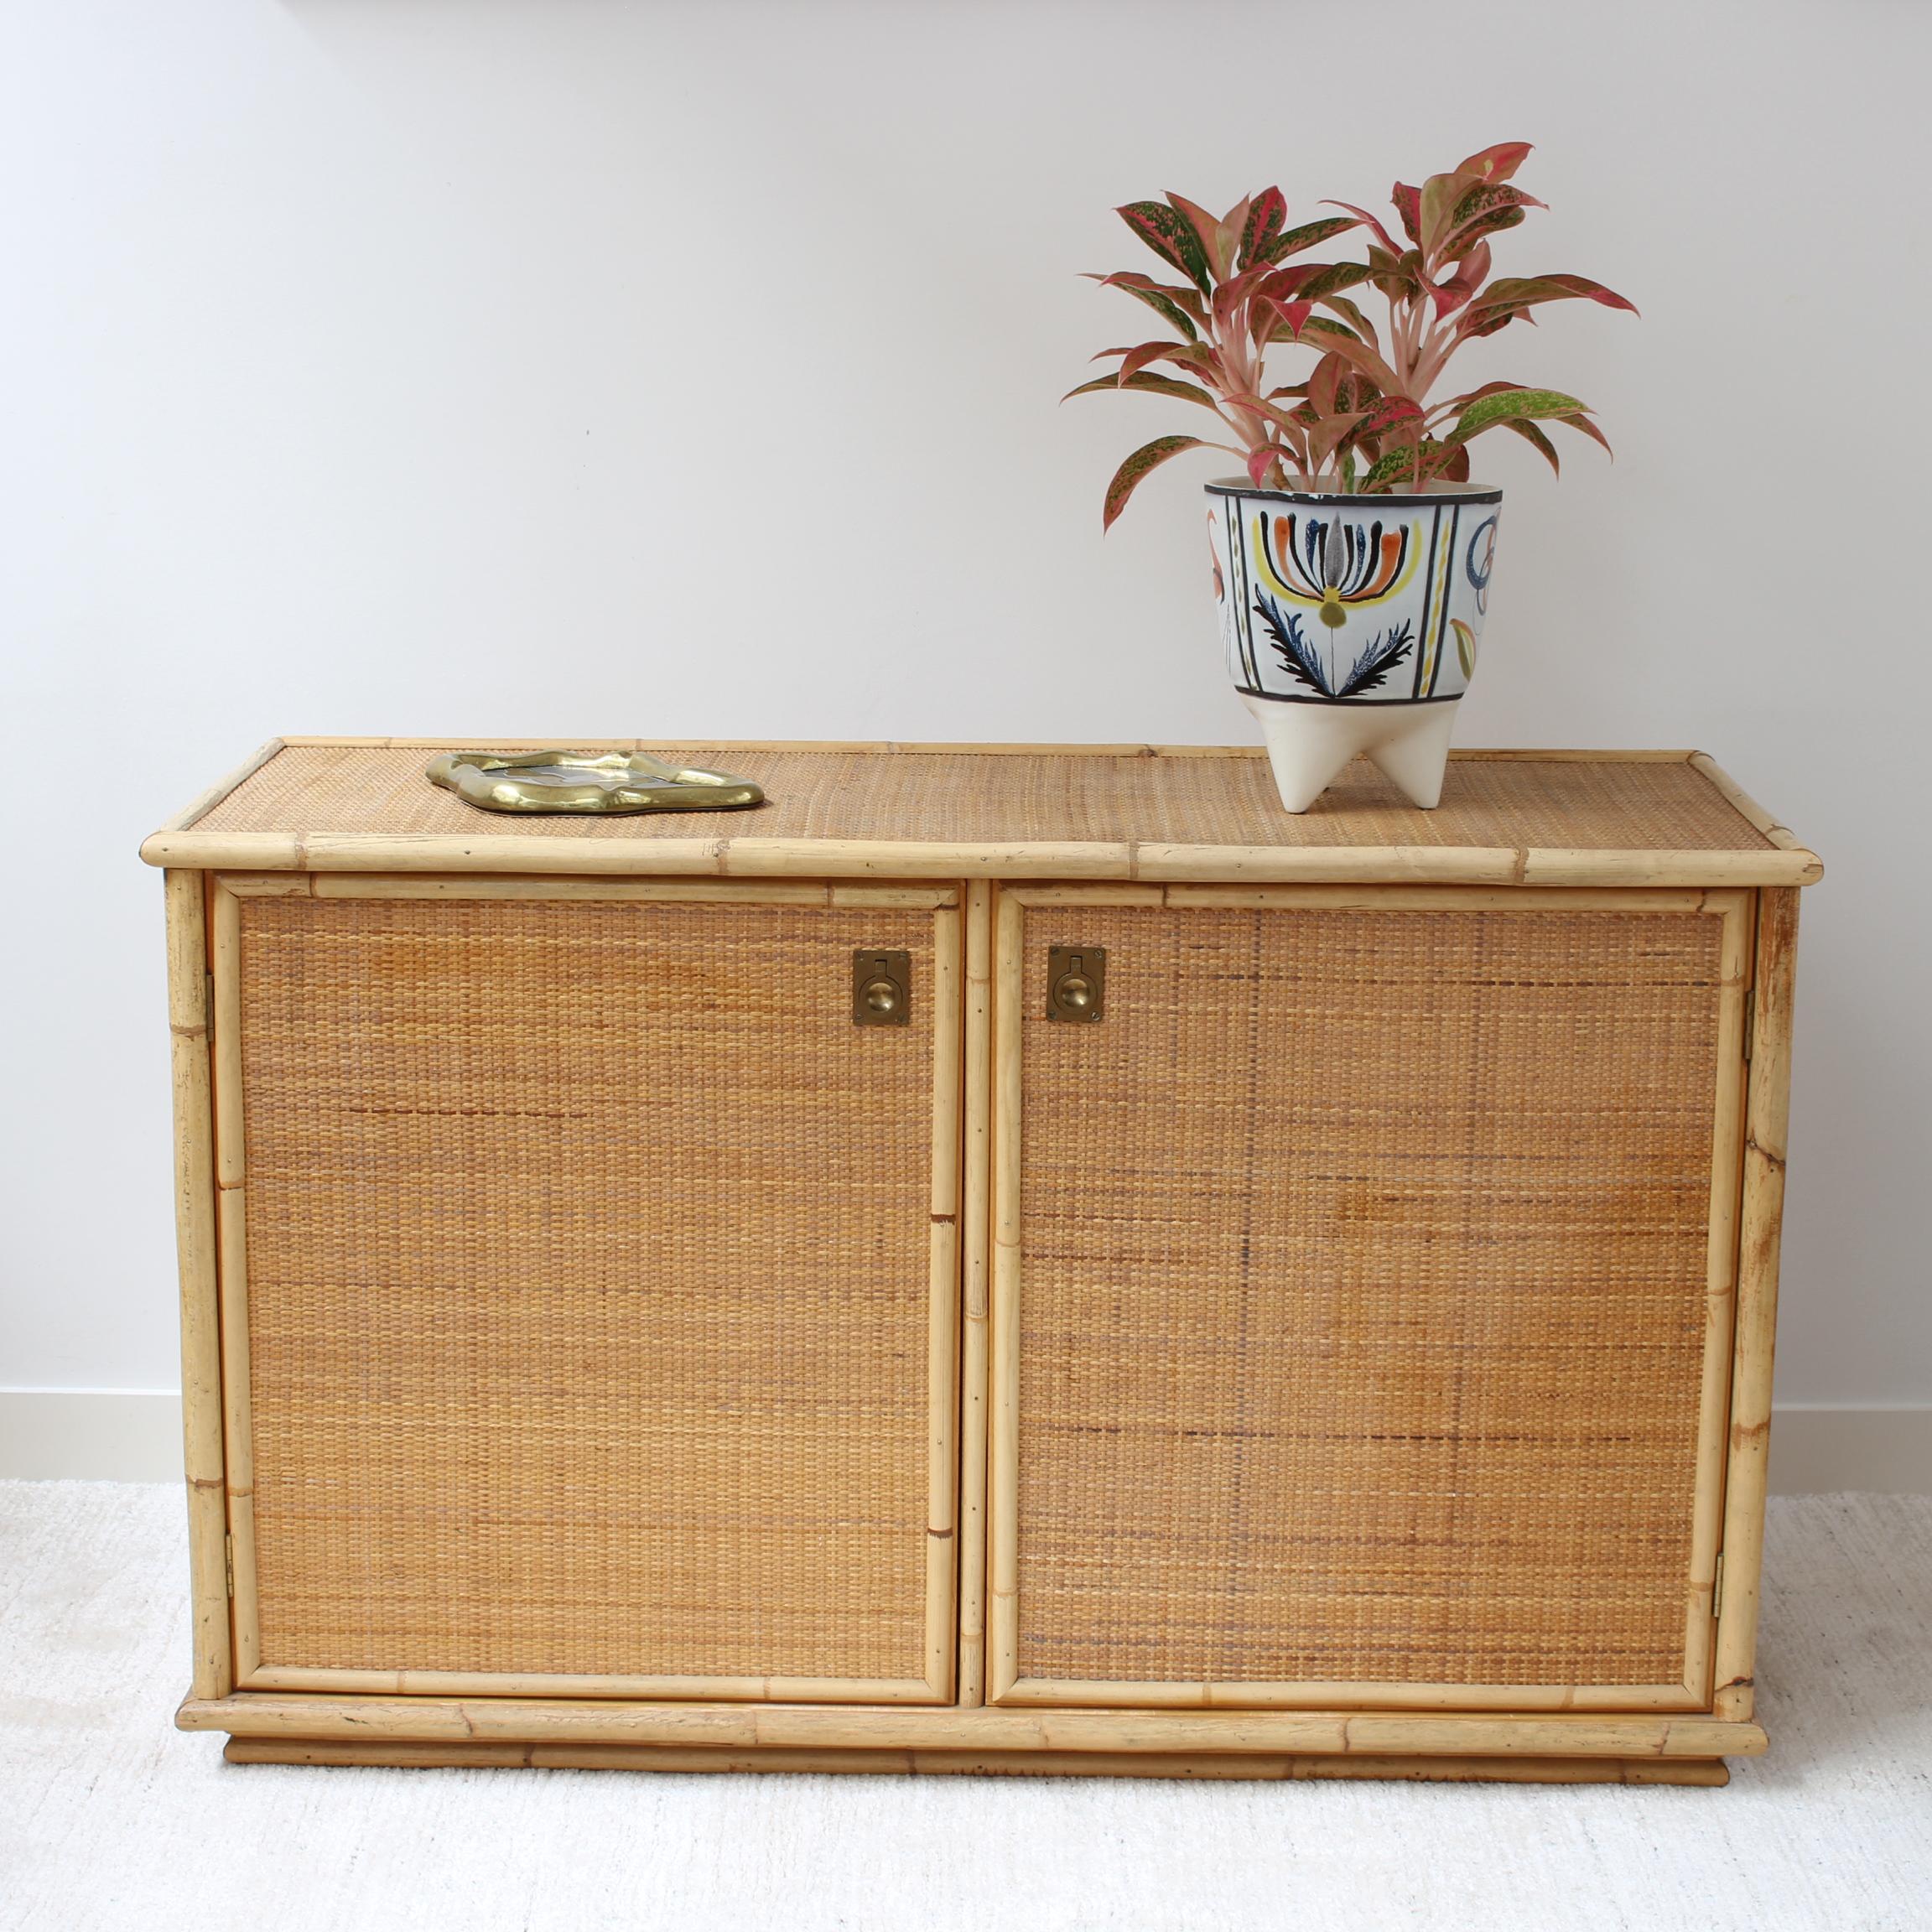 Bamboo and wicker credenza from Italian maker, Dal Vera (circa 1970s). Delightful piece with four spacious compartments behind two cupboard doors with smart brass fittings. San Remo, Monte Carlo, Nice and Cannes come to mind as this distinctive